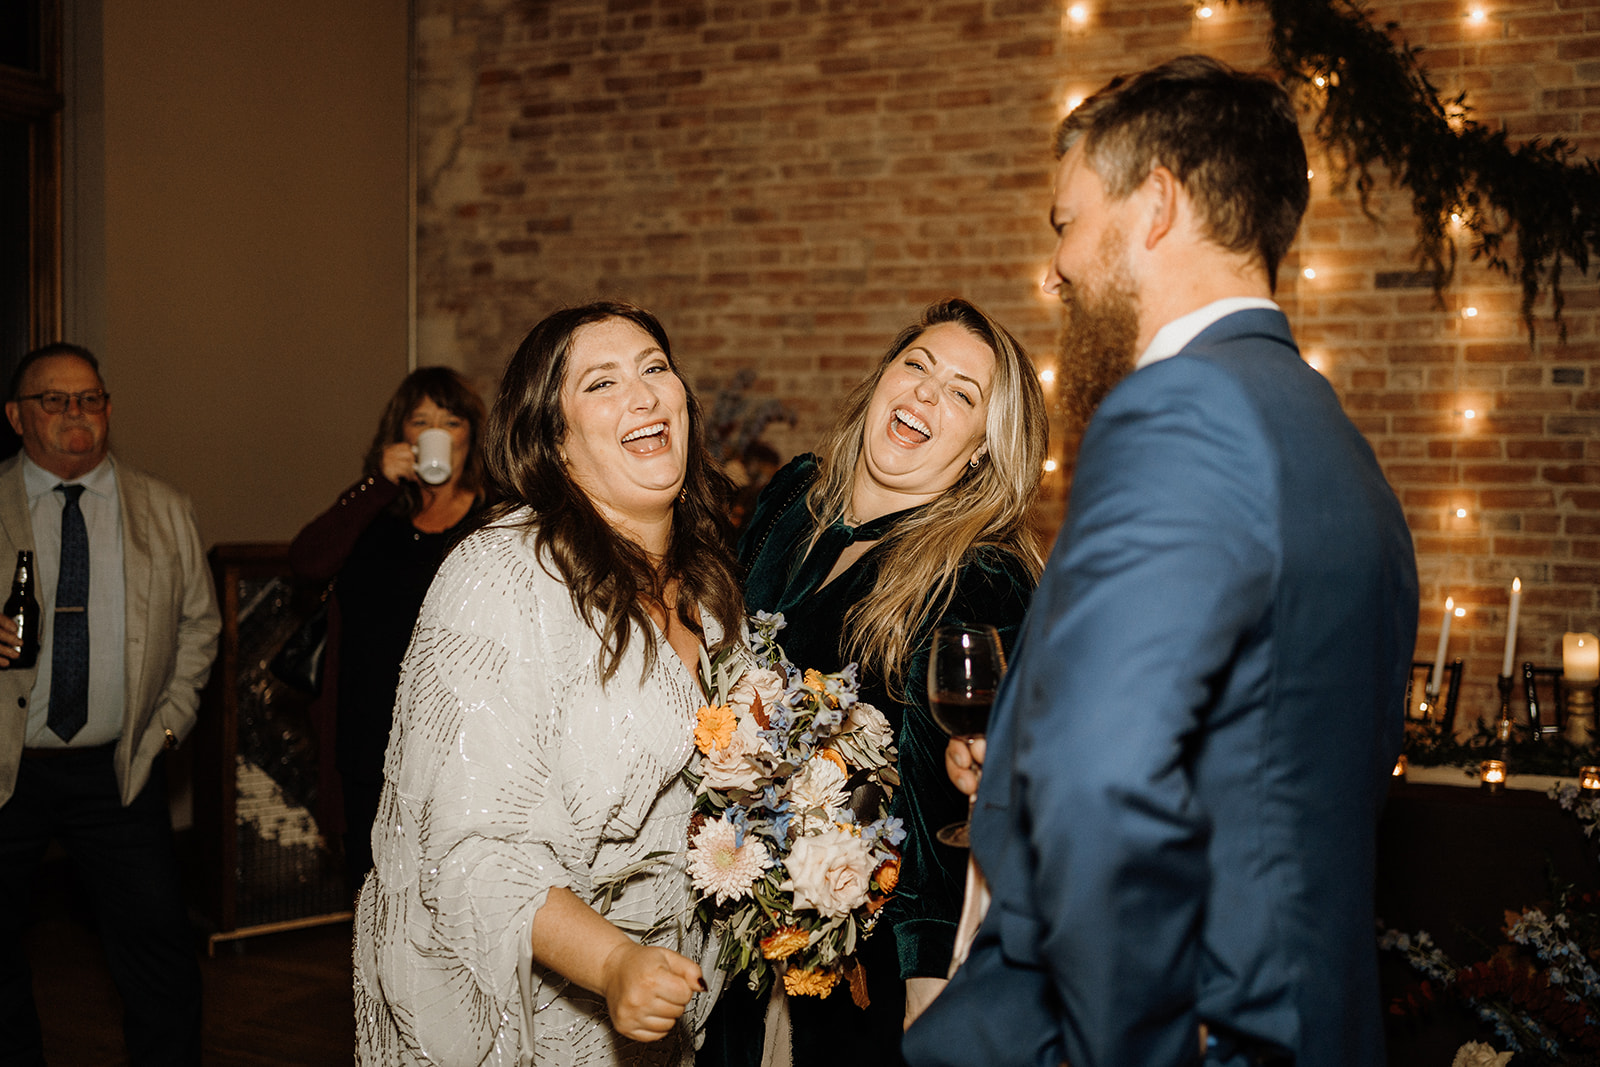 The bride laughing with guests at her wedding.